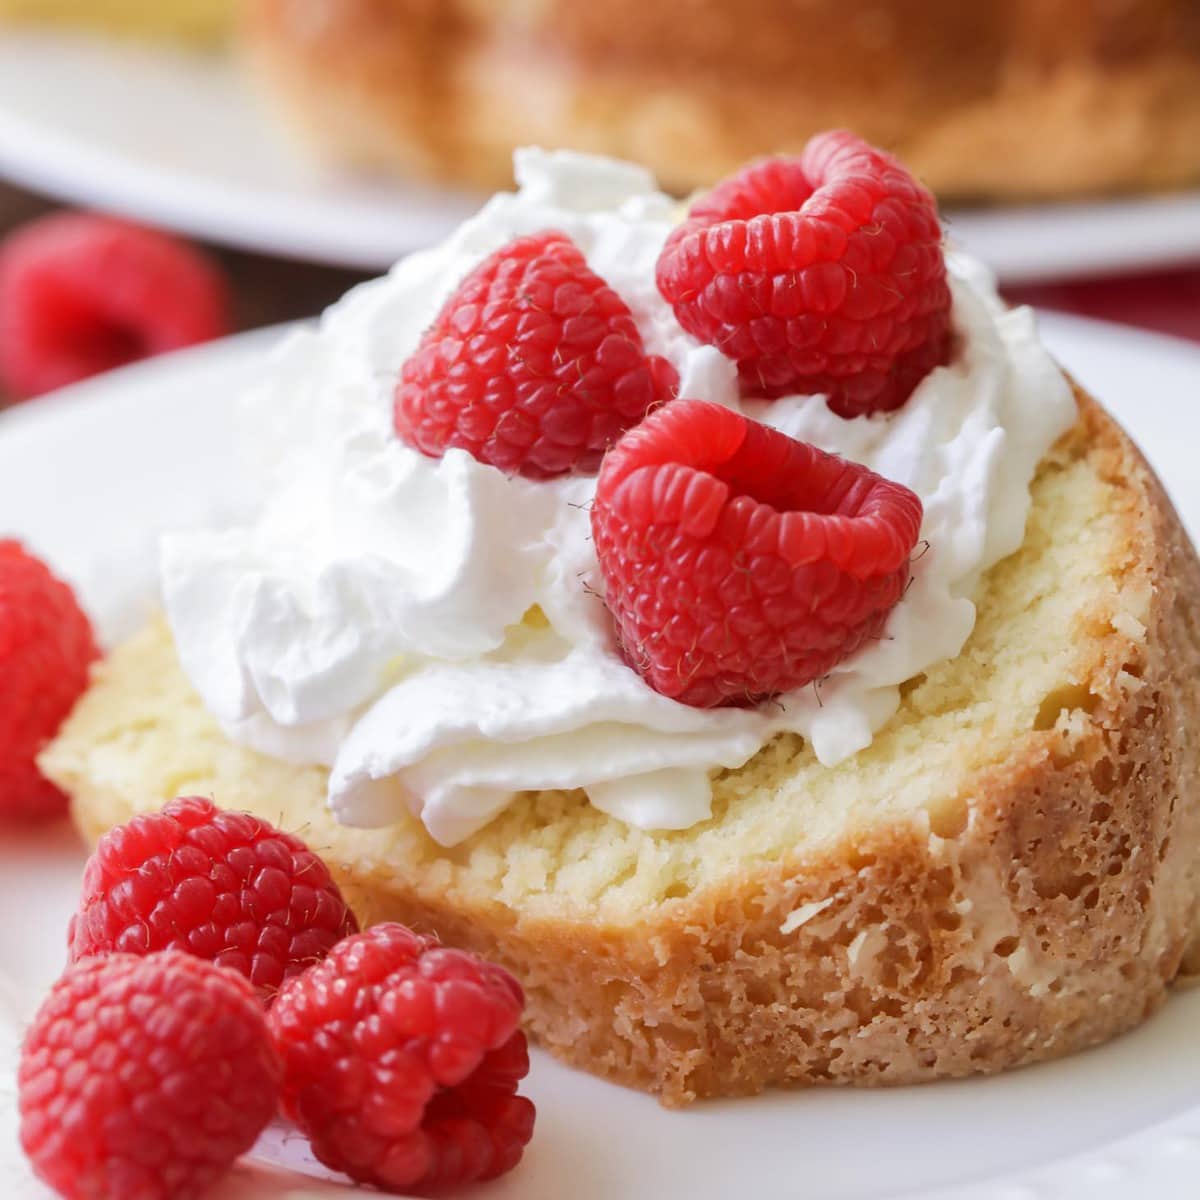 A slice of homemade cream cheese Pound Cake topped with whipped cream and raspberries.